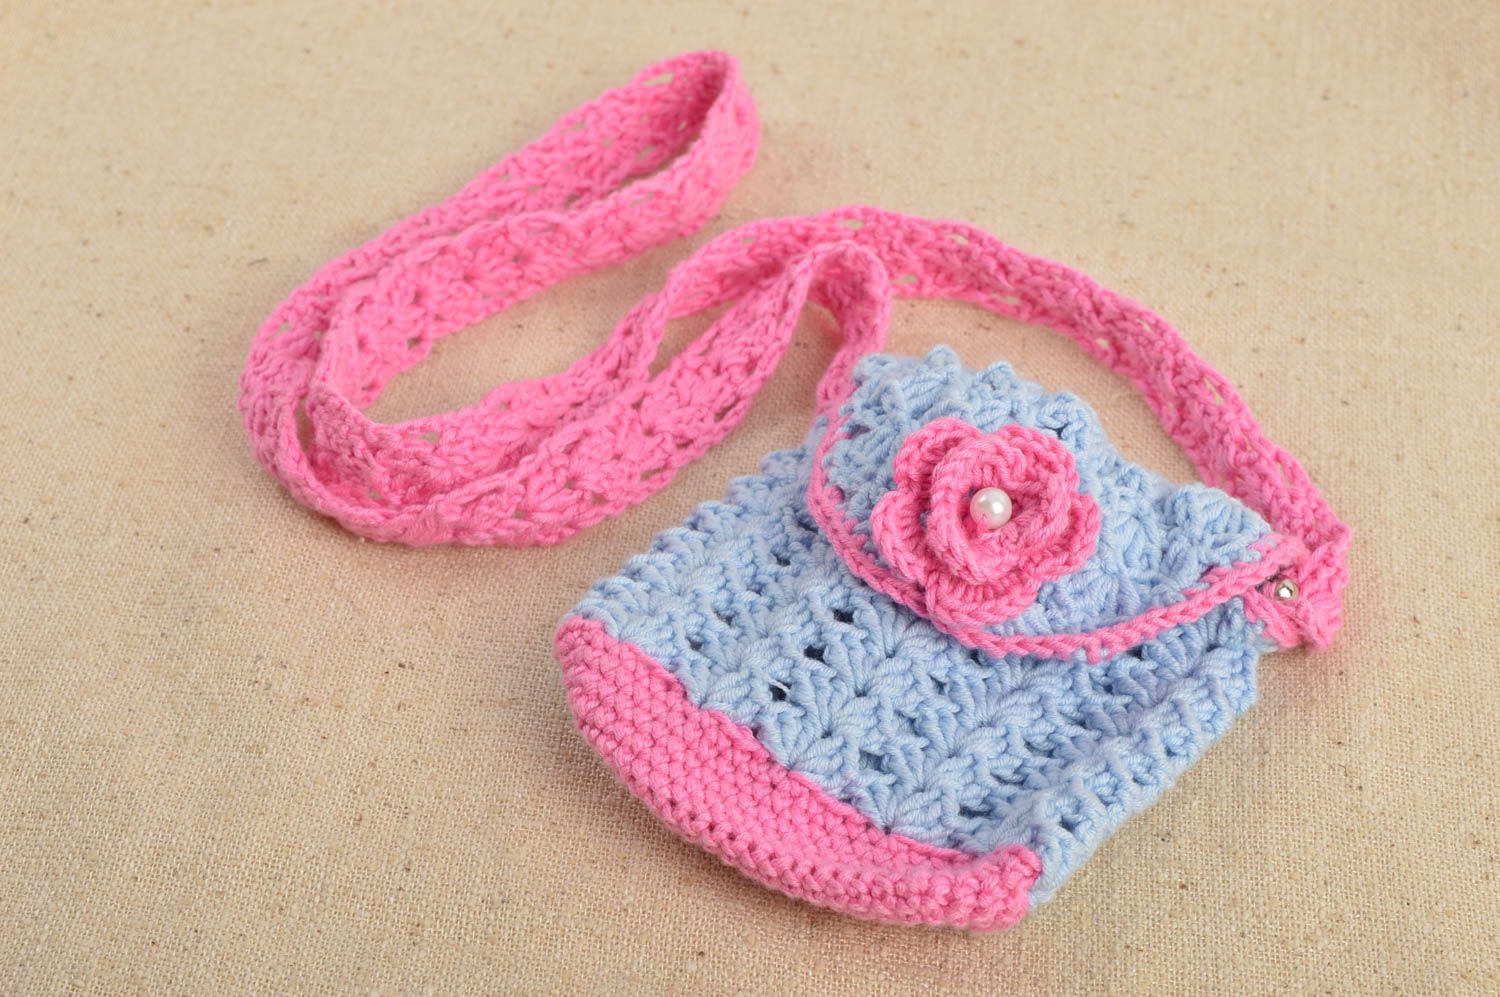 CC How to crochet little purse - YouTube